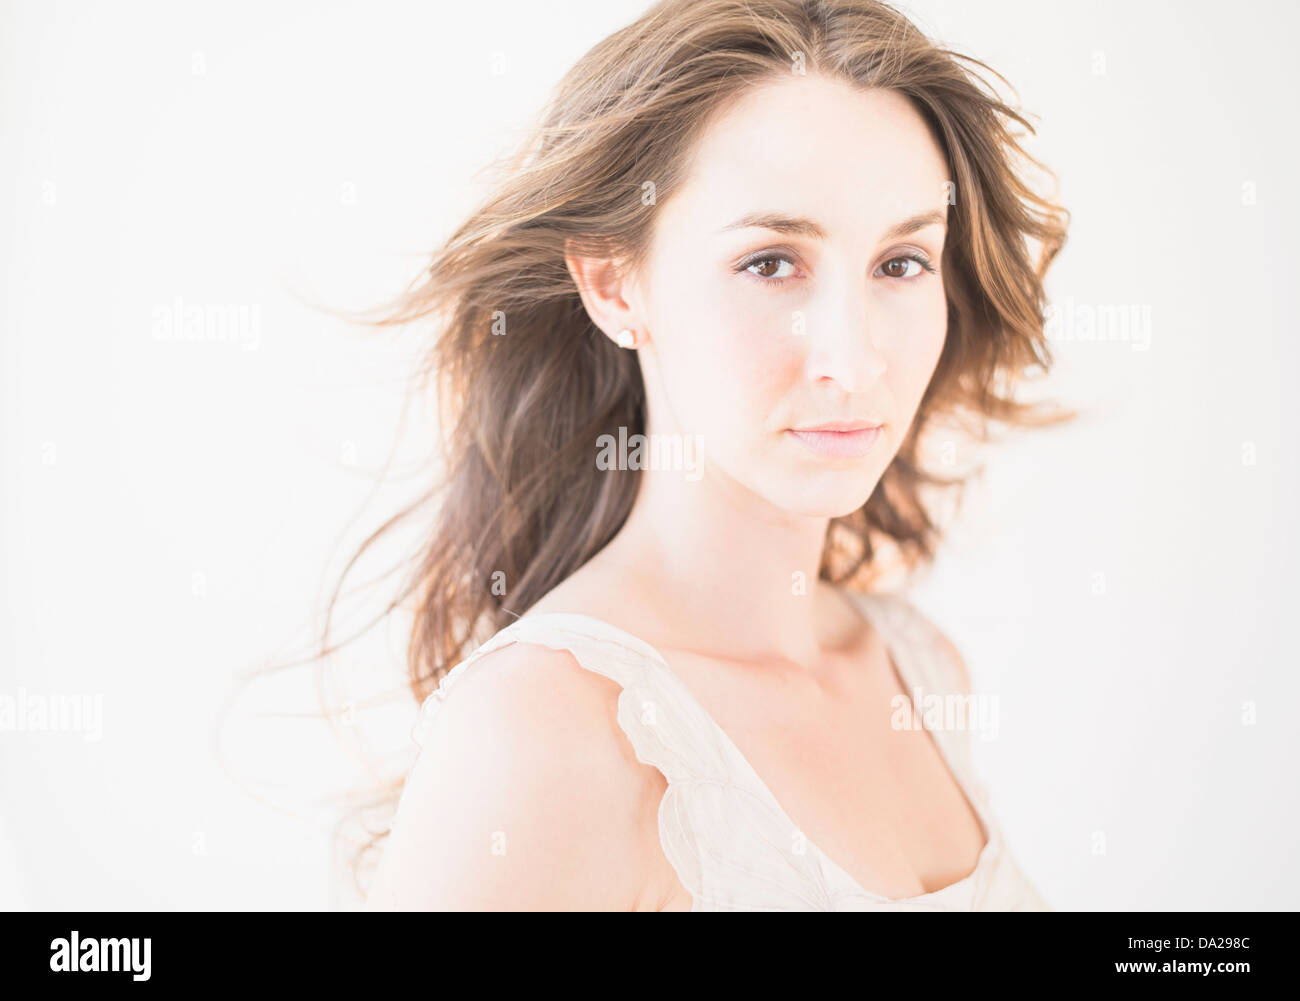 Portrait of beautiful young woman Stock Photo